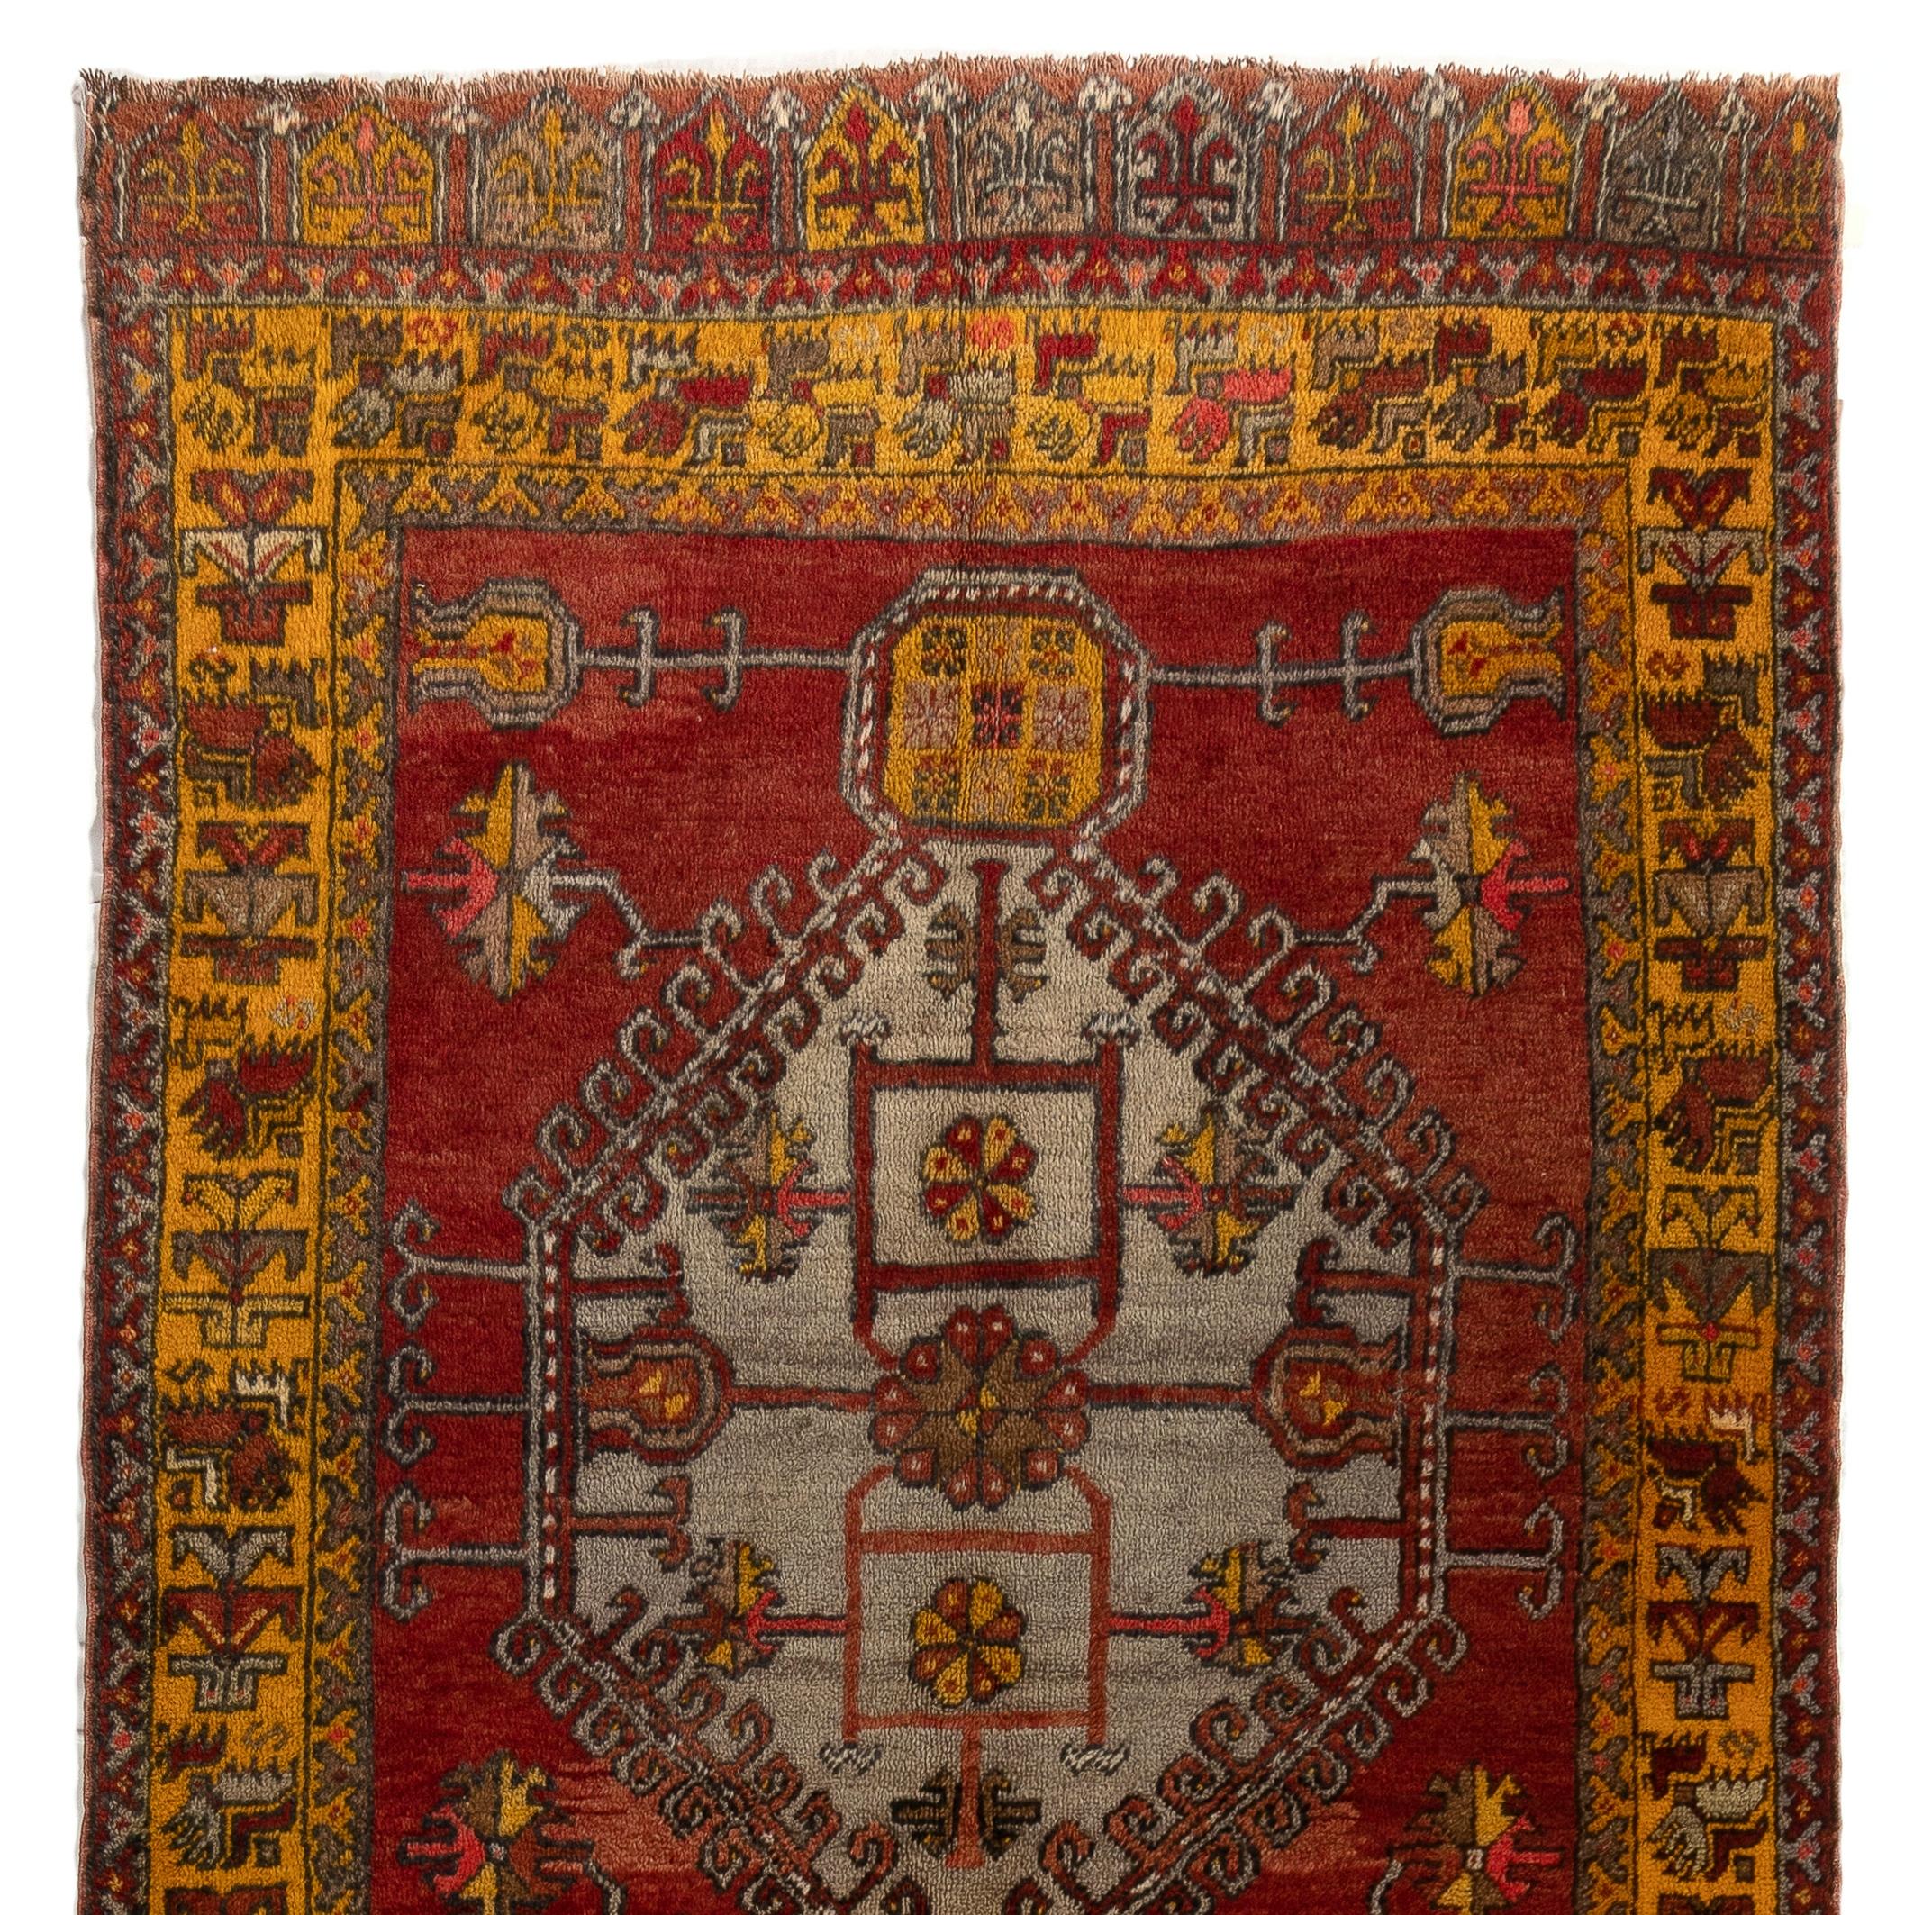 A vintage Central Anatolian village runner rug with a gorgeous linked medallions design decorated with carefully assembled details in glowing, saturated colors of red and saffron, as well as shimmering hues of gray and very light blue. This rug was